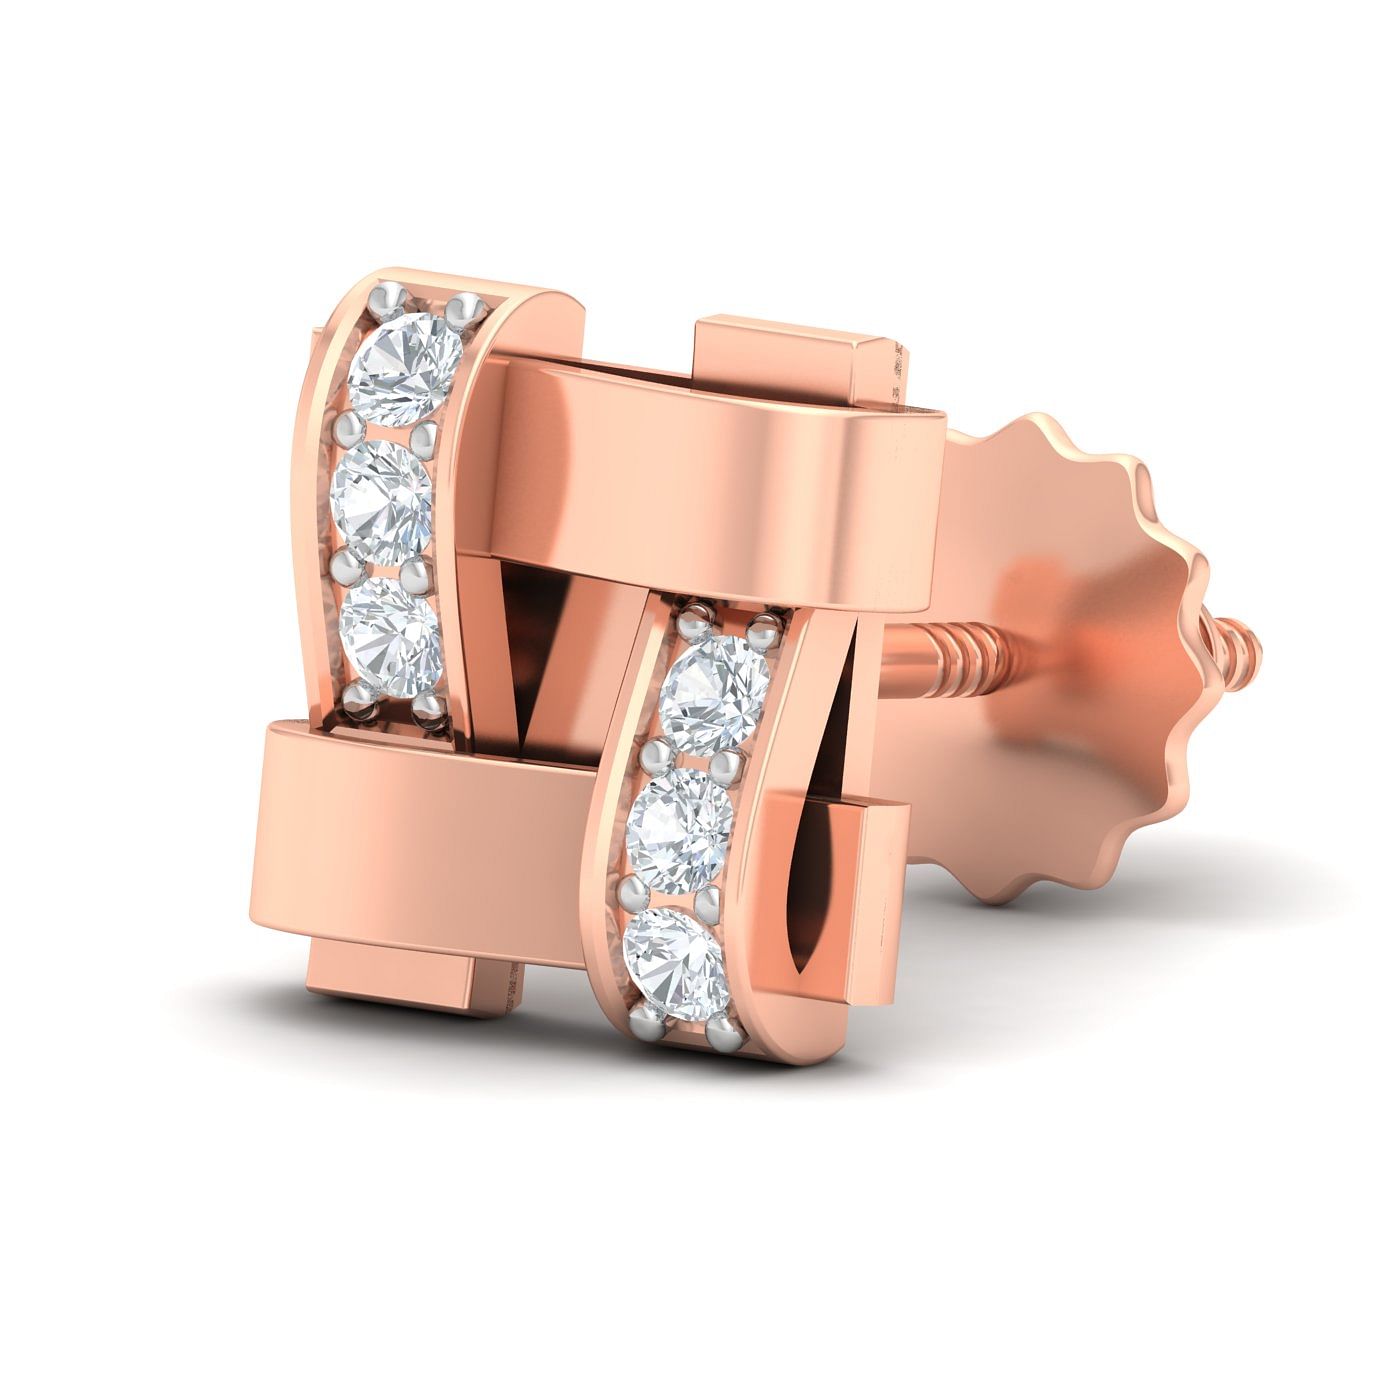 Rose Gold Simon Diamond Men's Stud Earrings Who says jewellery has to be boring? If you're looking for something a little more exciting